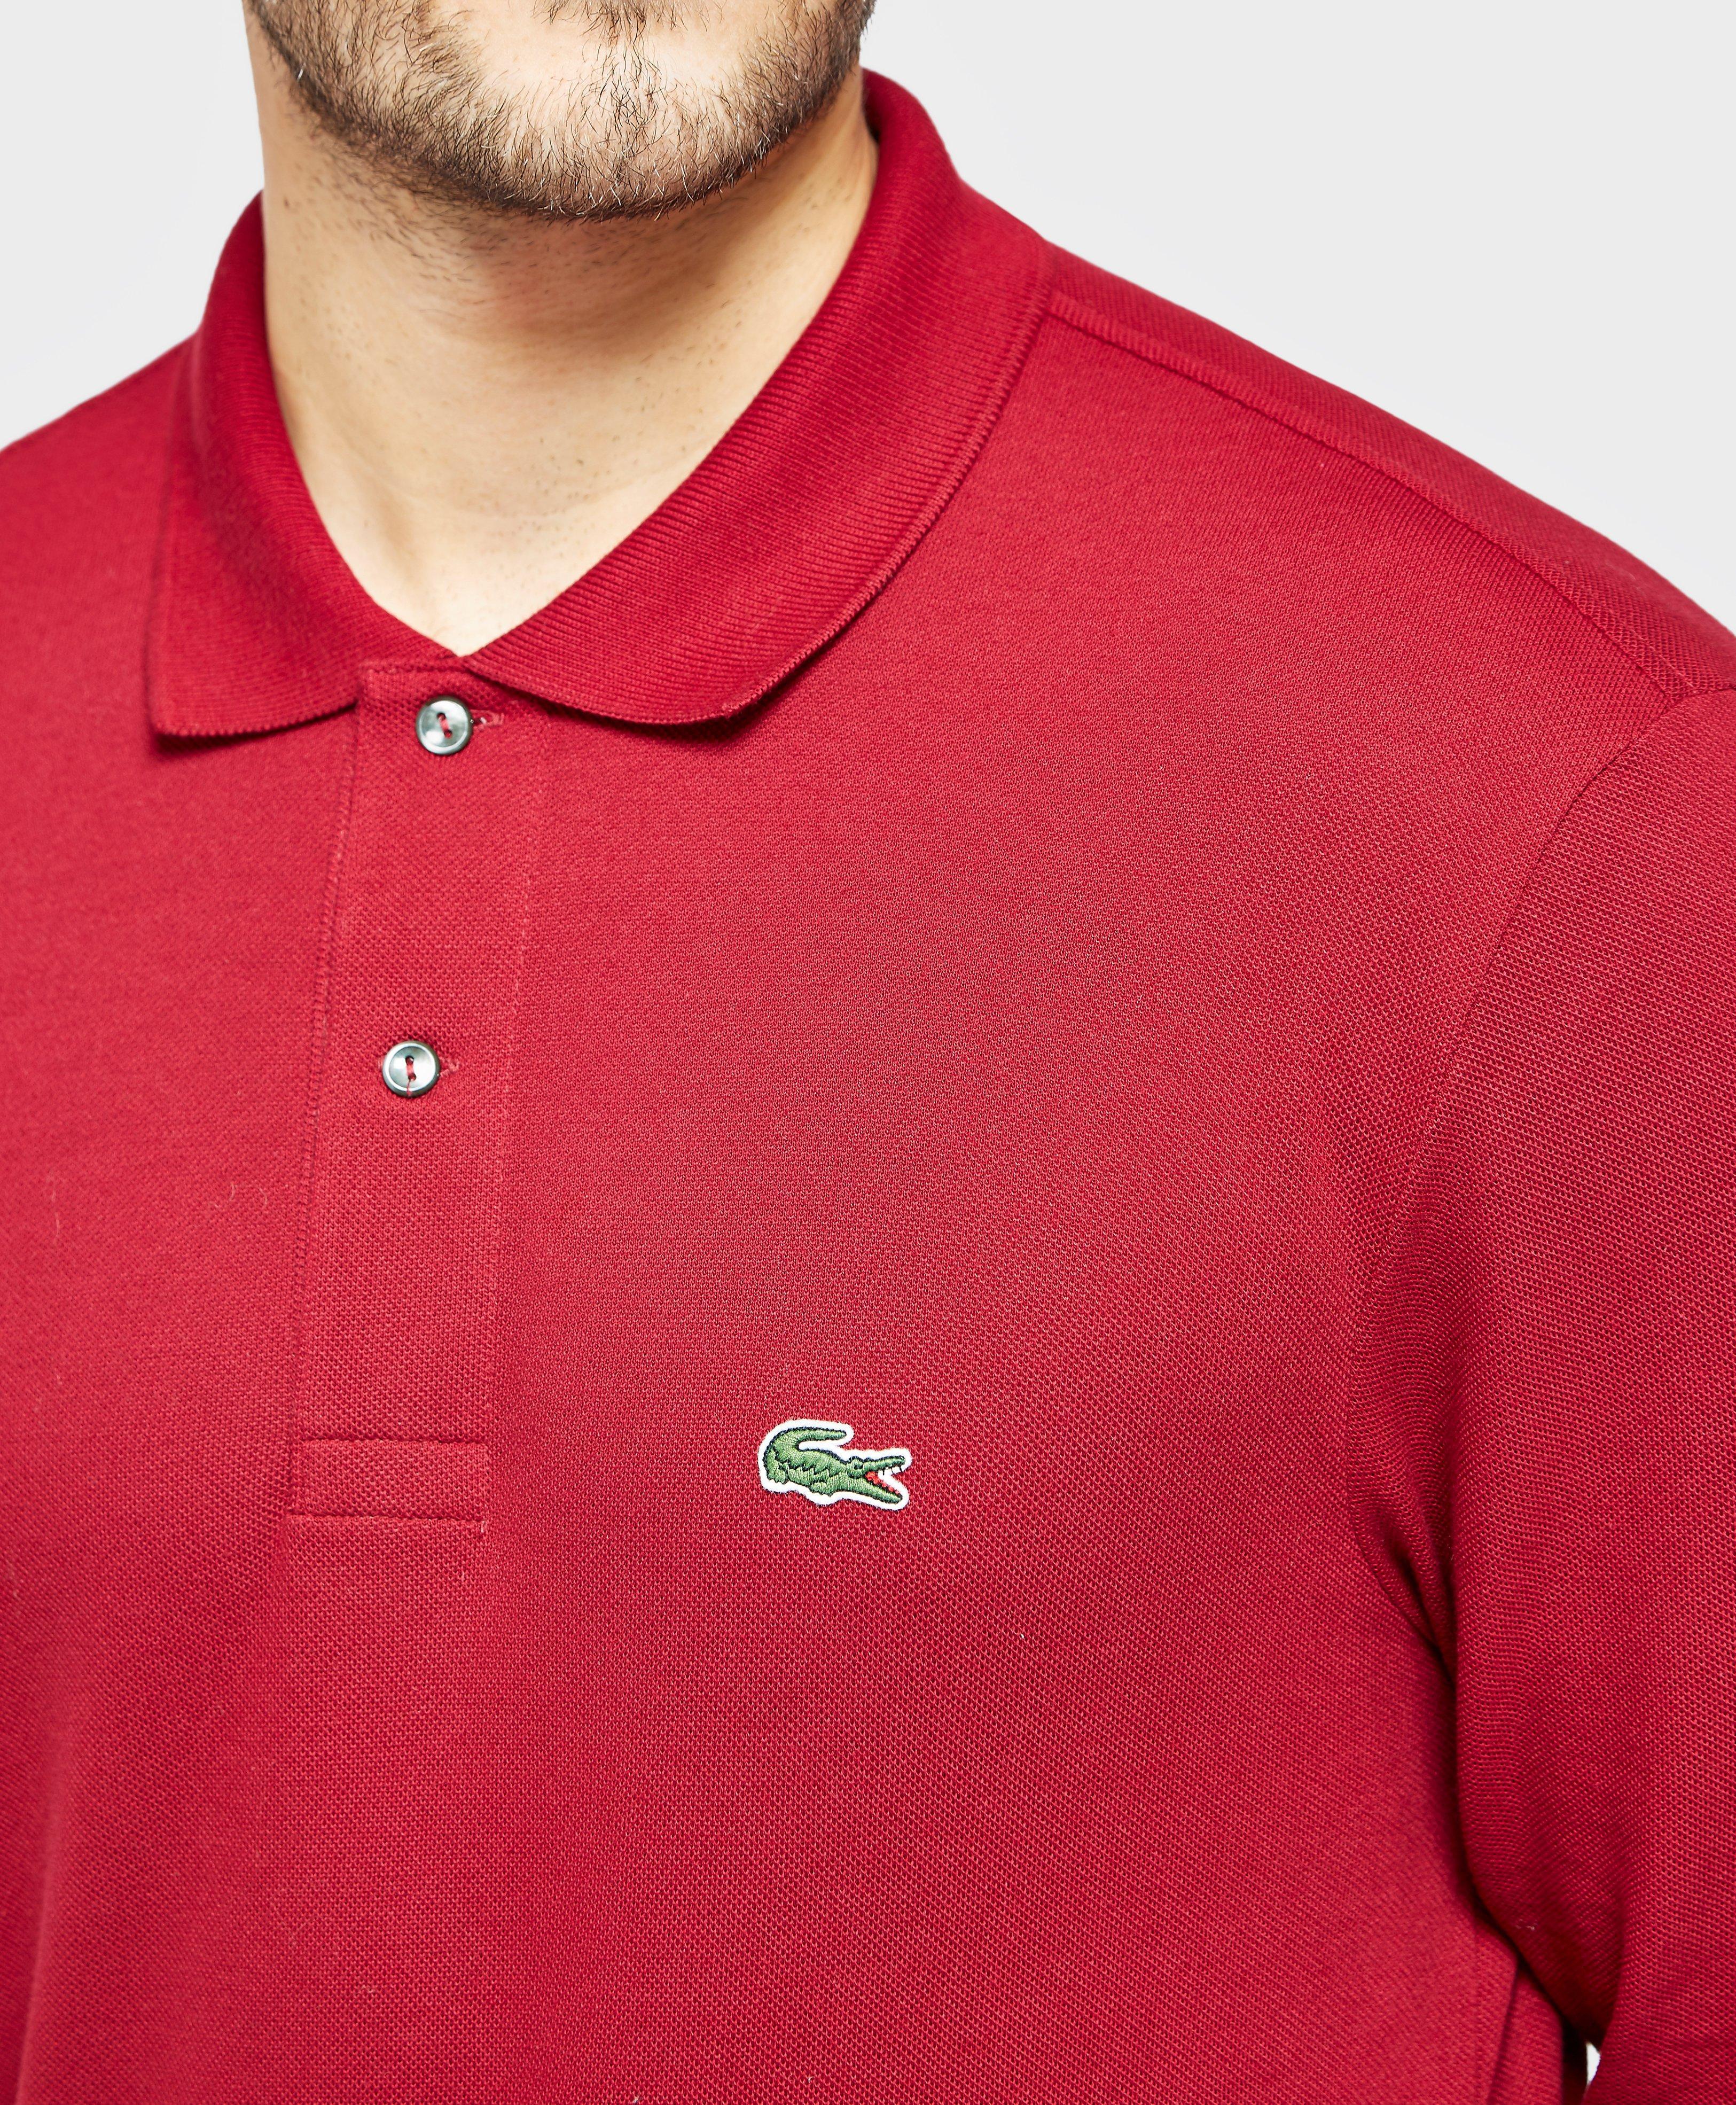 Lacoste Cotton Long Sleeve Polo Shirt in Red for Men - Lyst